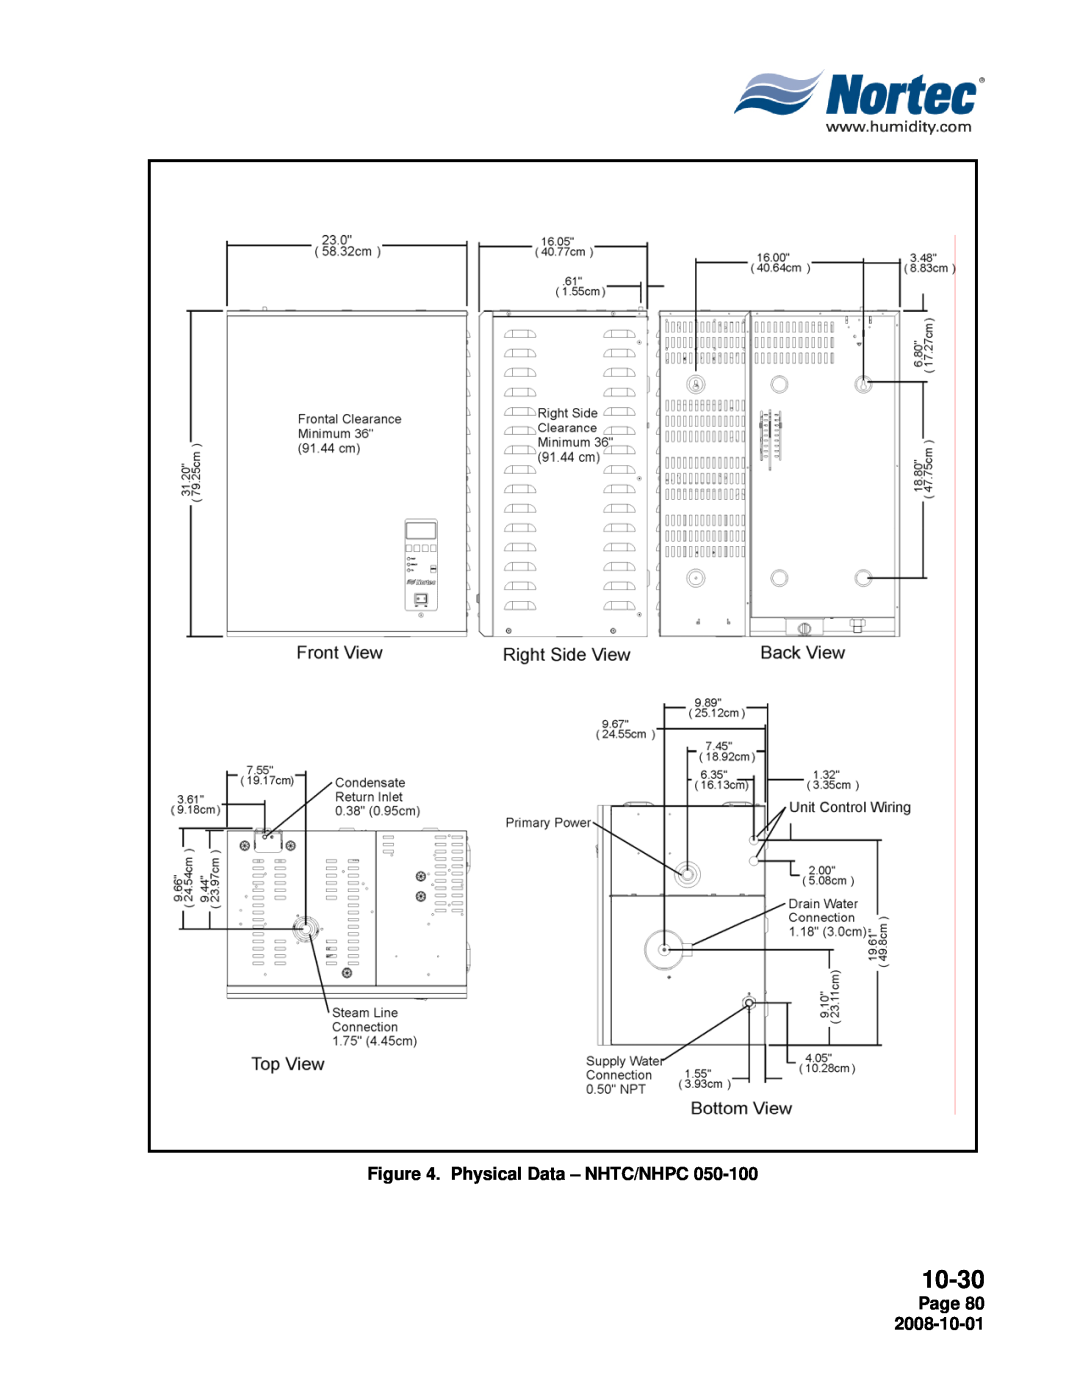 Nortec manual 10-30, Physical Data – NHTC/NHPC, Page 80 